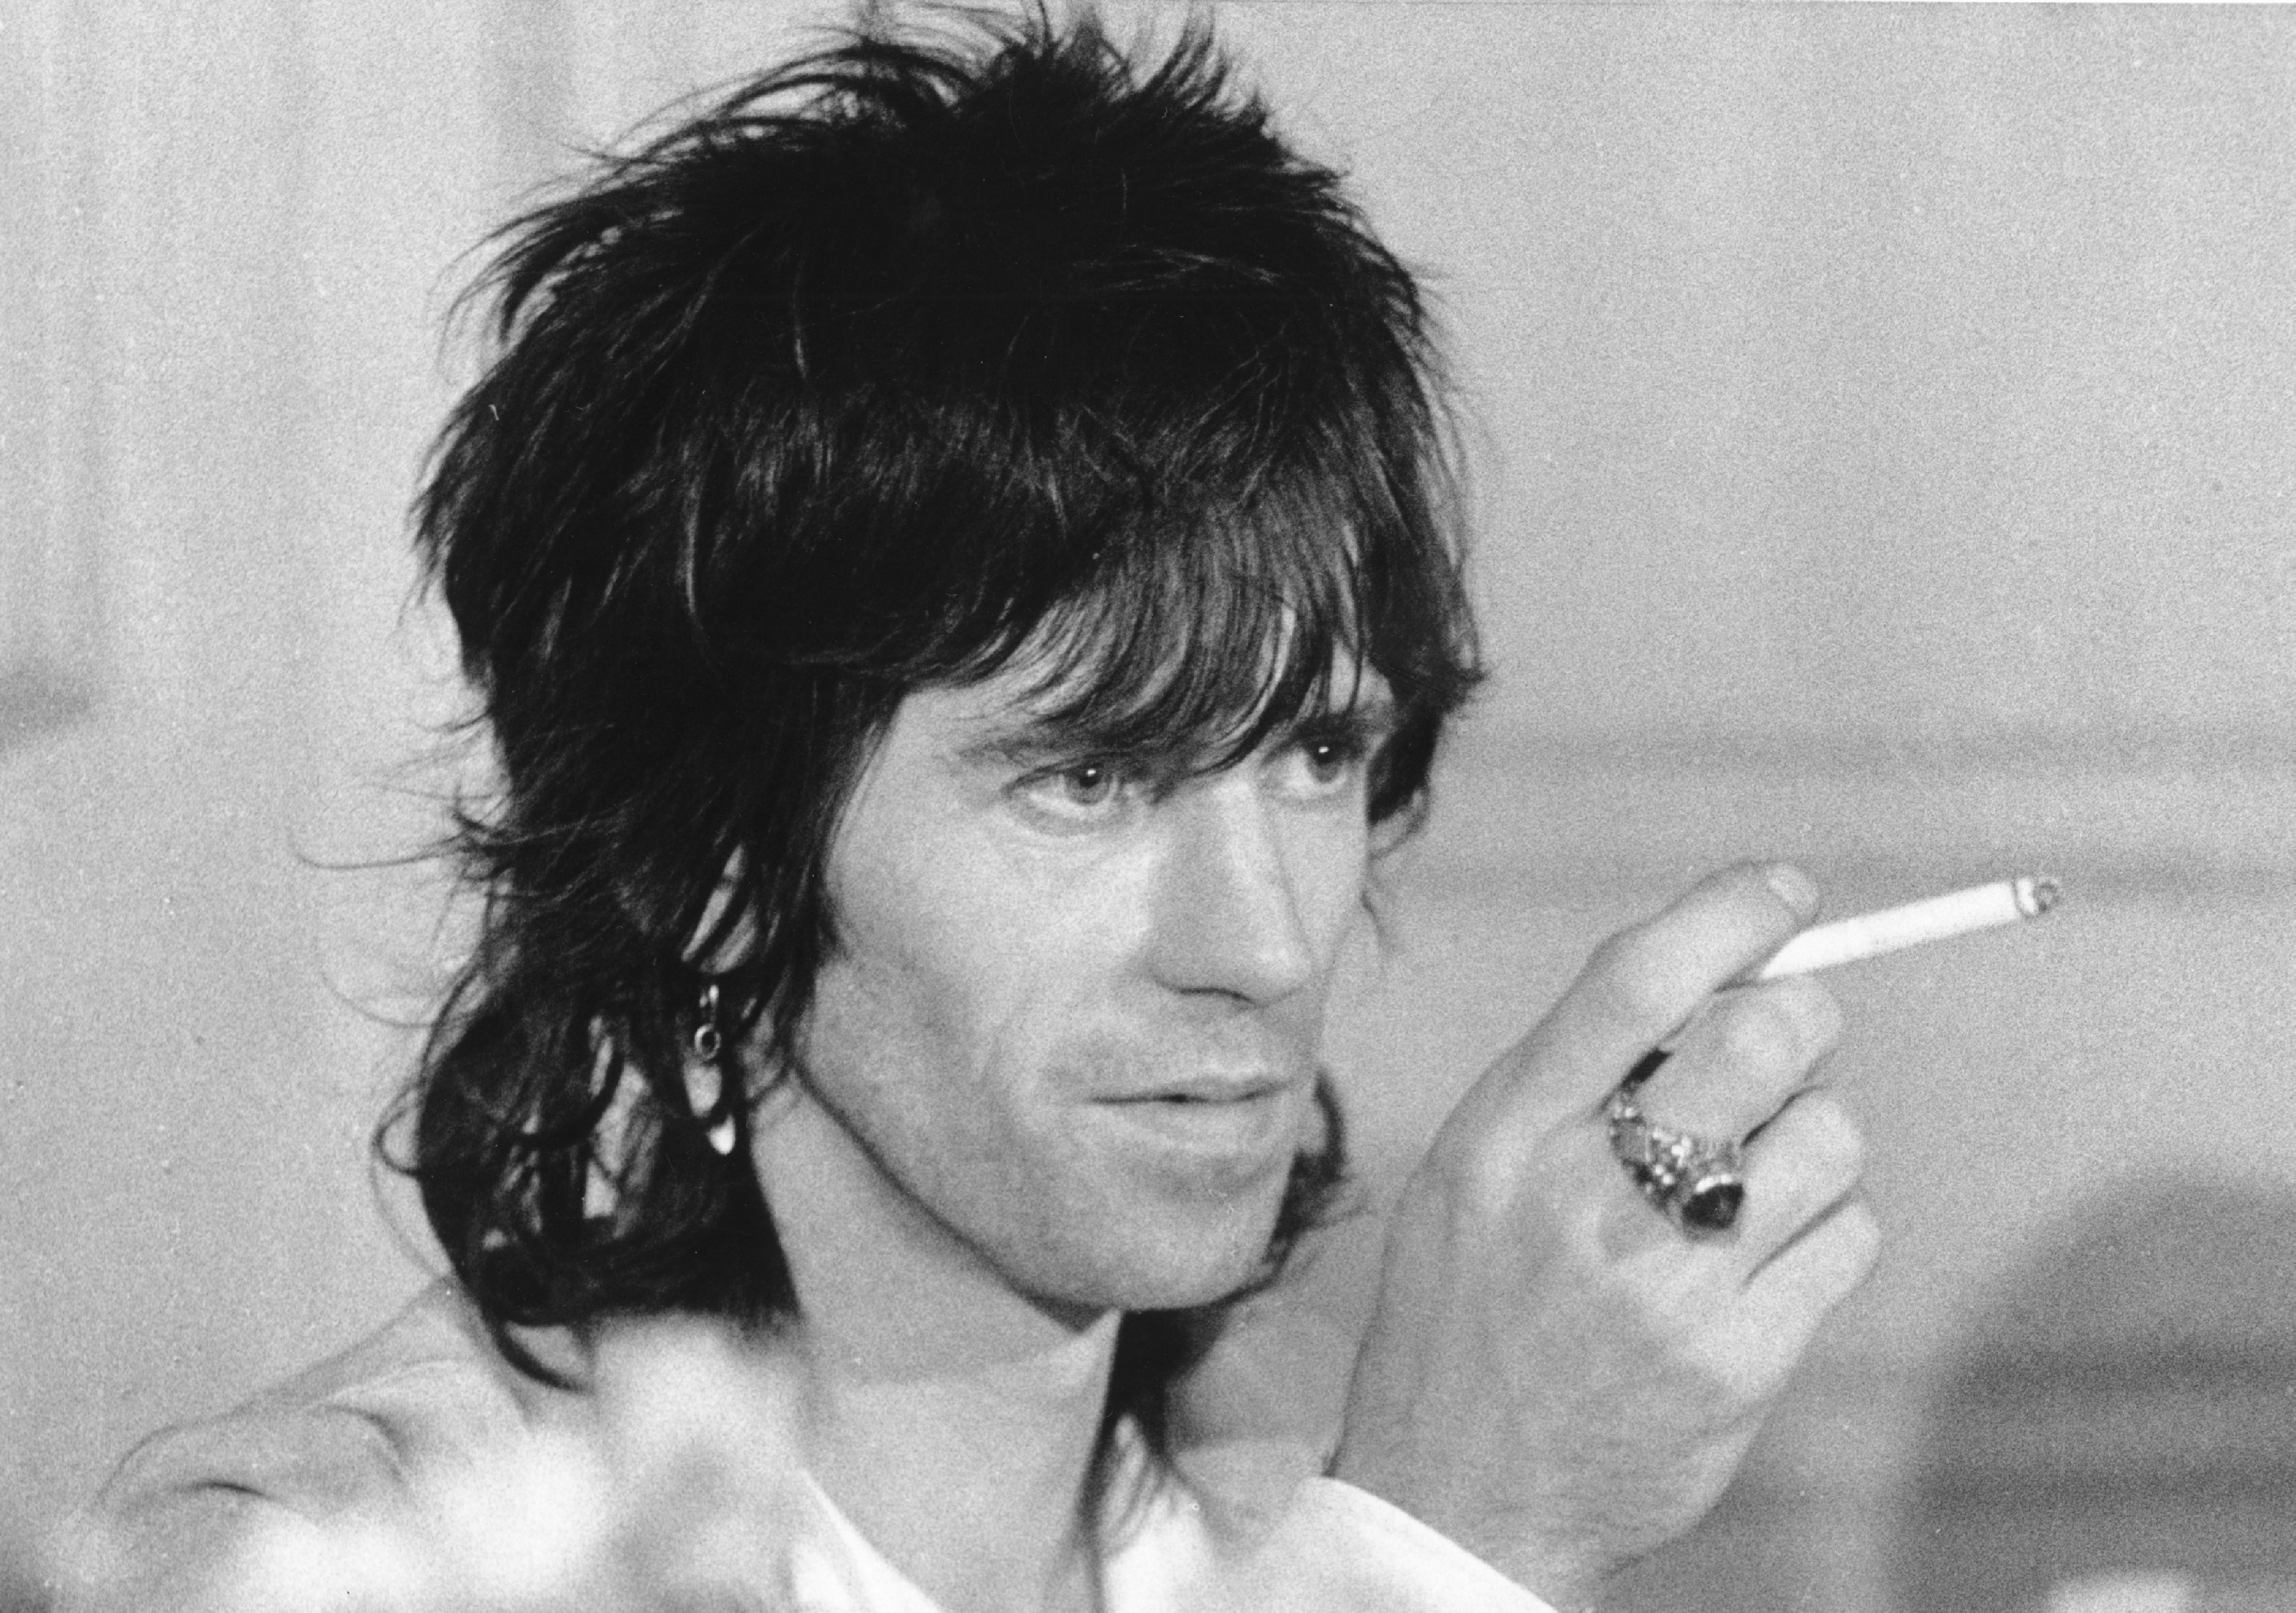 A black and white photo of Keith Richards wearing a ring on his middle finger and smoking a cigarette.